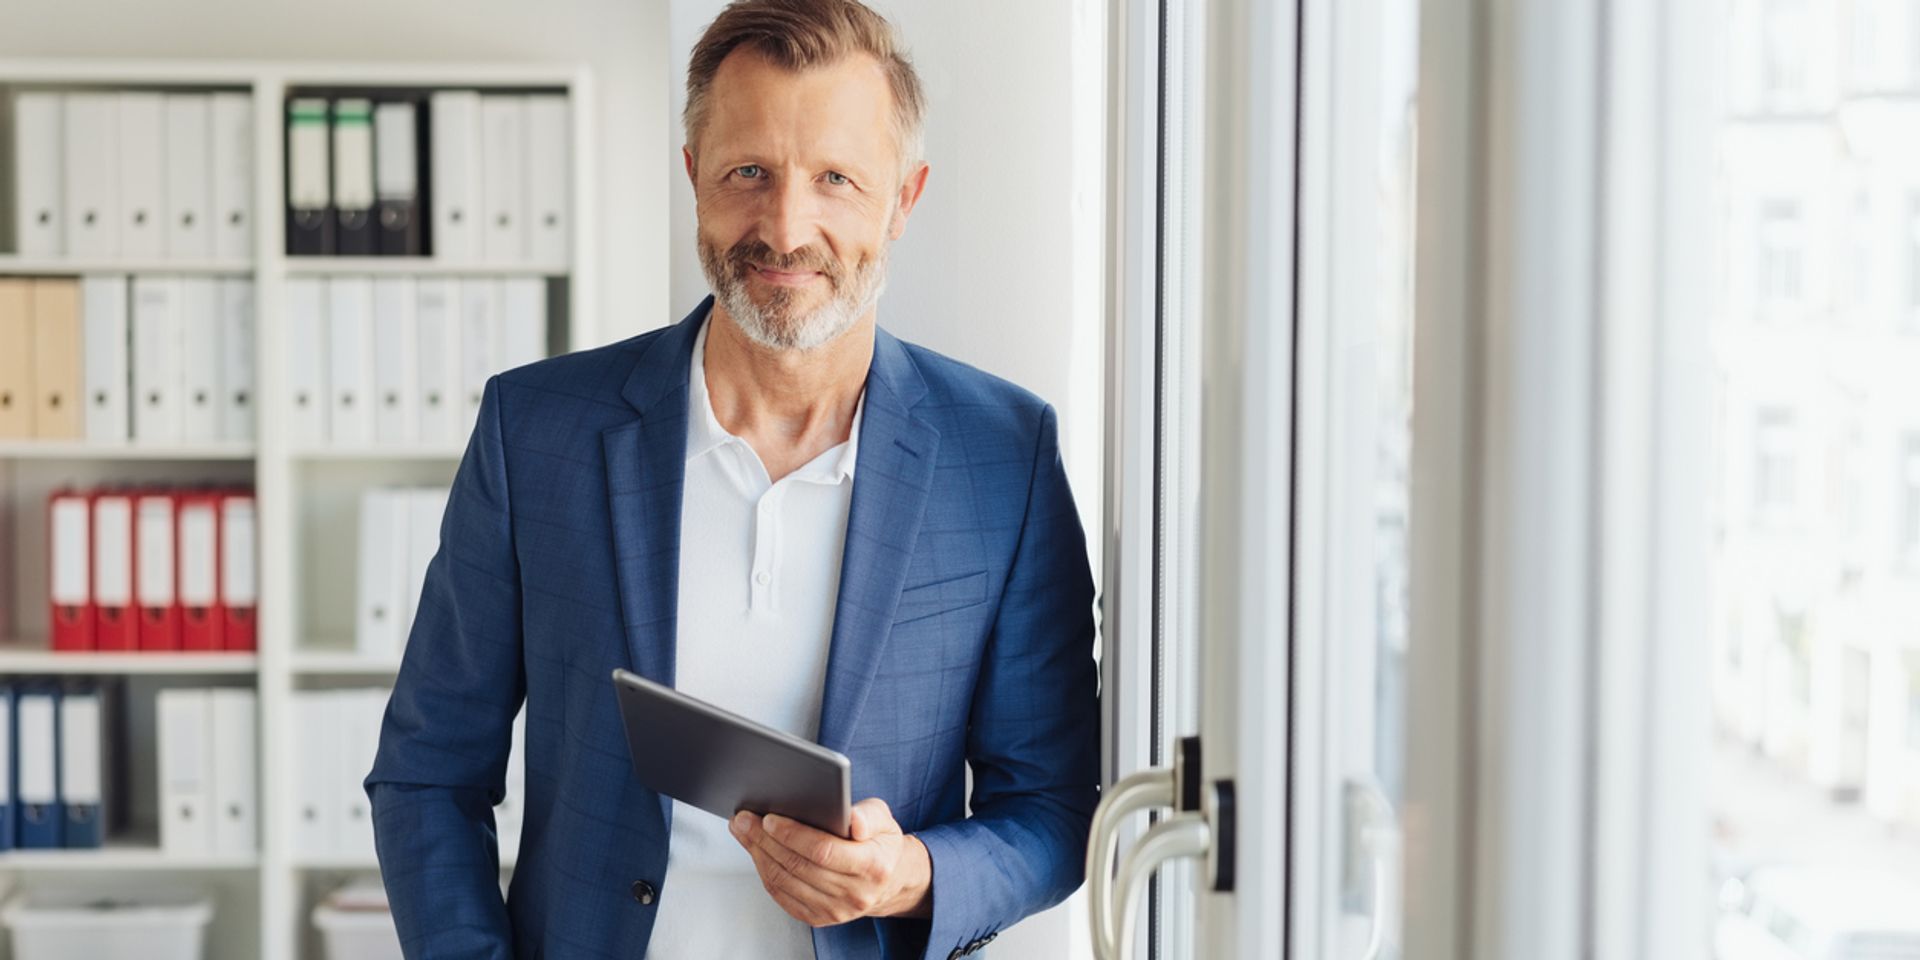 Smart relaxed confident senior businessman holding a tablet standing leaning against a glass door at the office smiling at camera